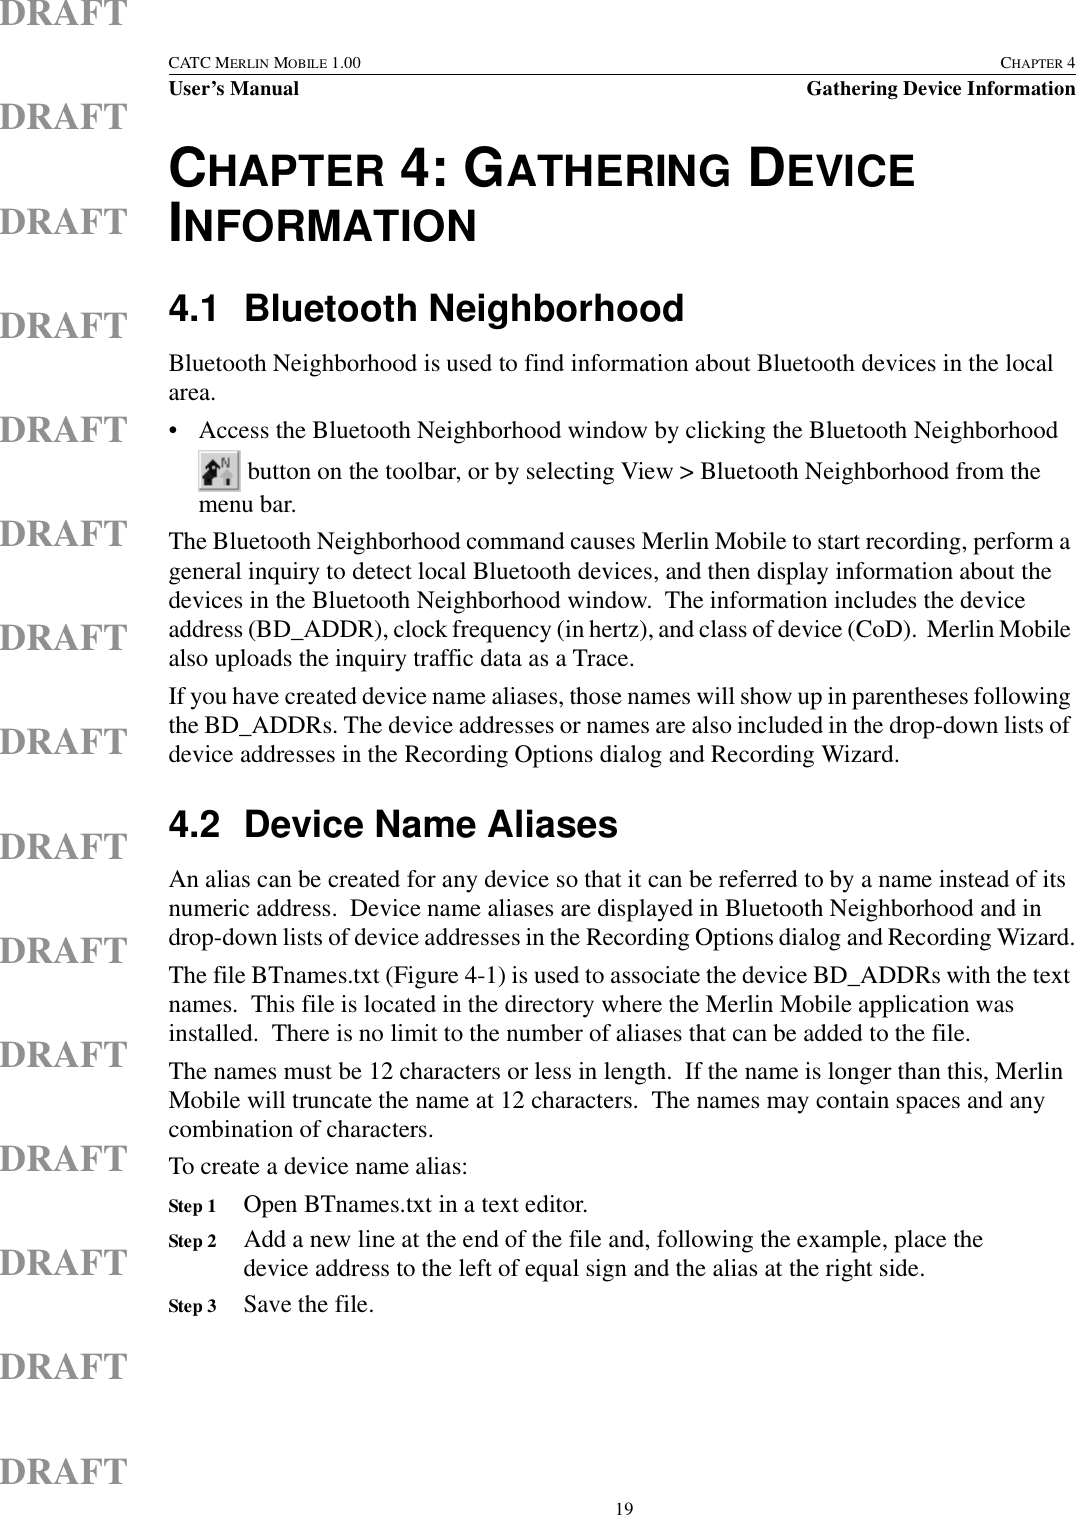  19CATC MERLIN MOBILE 1.00 CHAPTER 4User’s Manual Gathering Device InformationDRAFTDRAFTDRAFTDRAFTDRAFTDRAFTDRAFTDRAFTDRAFTDRAFTDRAFTDRAFTDRAFTDRAFTDRAFTCHAPTER 4: GATHERING DEVICE INFORMATION4.1 Bluetooth NeighborhoodBluetooth Neighborhood is used to find information about Bluetooth devices in the local area.• Access the Bluetooth Neighborhood window by clicking the Bluetooth Neighborhood  button on the toolbar, or by selecting View &gt; Bluetooth Neighborhood from the menu bar.The Bluetooth Neighborhood command causes Merlin Mobile to start recording, perform a general inquiry to detect local Bluetooth devices, and then display information about the devices in the Bluetooth Neighborhood window.  The information includes the device address (BD_ADDR), clock frequency (in hertz), and class of device (CoD).  Merlin Mobile also uploads the inquiry traffic data as a Trace.If you have created device name aliases, those names will show up in parentheses following the BD_ADDRs. The device addresses or names are also included in the drop-down lists of device addresses in the Recording Options dialog and Recording Wizard.4.2 Device Name AliasesAn alias can be created for any device so that it can be referred to by a name instead of its numeric address.  Device name aliases are displayed in Bluetooth Neighborhood and in drop-down lists of device addresses in the Recording Options dialog and Recording Wizard.The file BTnames.txt (Figure 4-1) is used to associate the device BD_ADDRs with the text names.  This file is located in the directory where the Merlin Mobile application was installed.  There is no limit to the number of aliases that can be added to the file.The names must be 12 characters or less in length.  If the name is longer than this, Merlin Mobile will truncate the name at 12 characters.  The names may contain spaces and any combination of characters.To create a device name alias:Step 1 Open BTnames.txt in a text editor.Step 2 Add a new line at the end of the file and, following the example, place the device address to the left of equal sign and the alias at the right side.Step 3 Save the file.